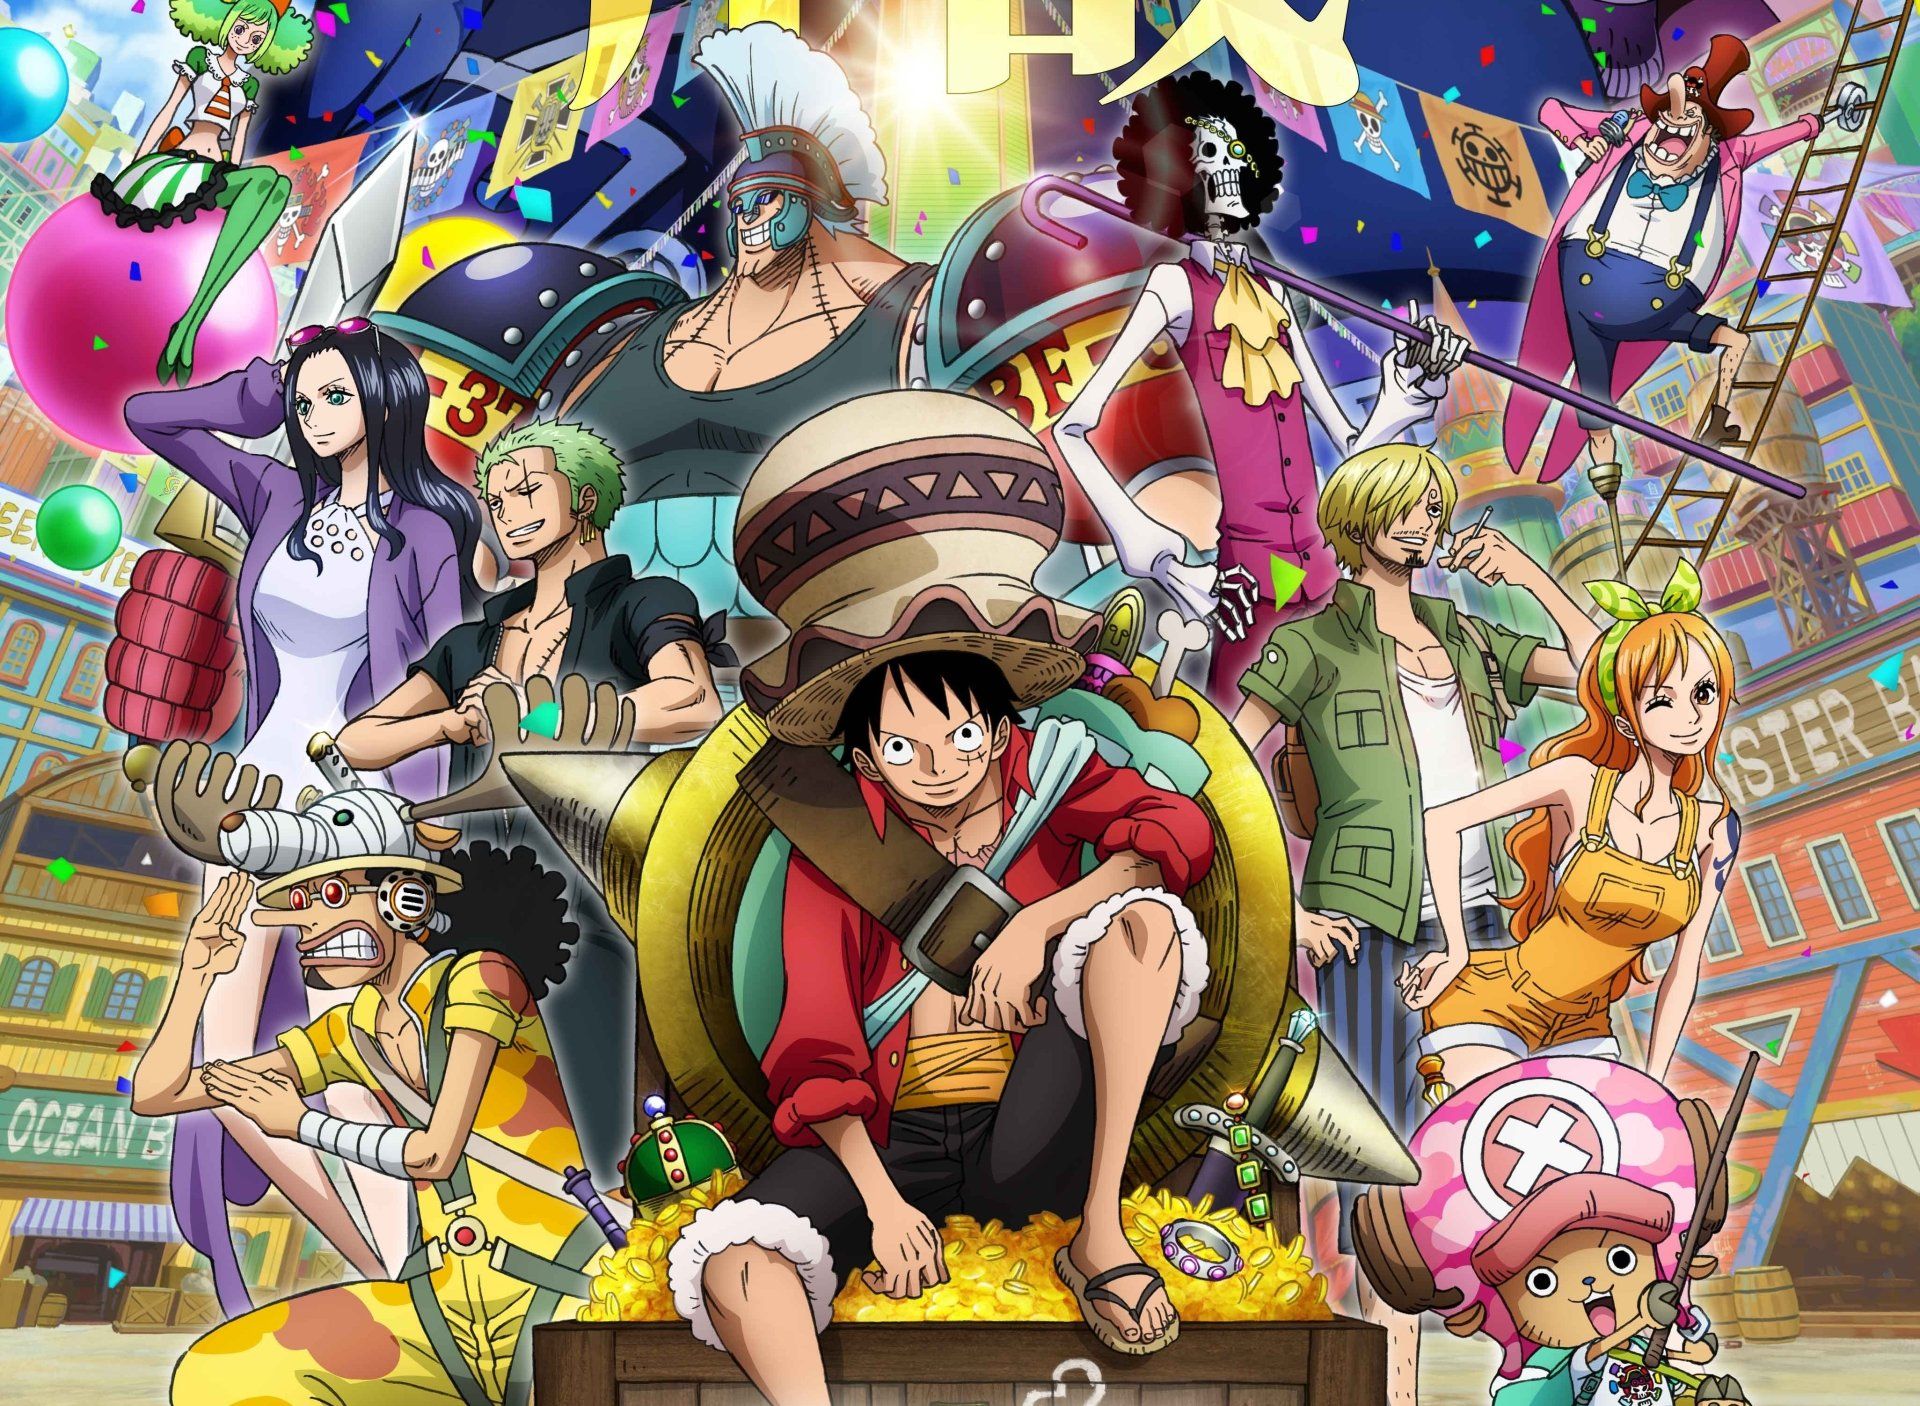 TV Show One Piece (Live Action) 4k Ultra HD Wallpaper